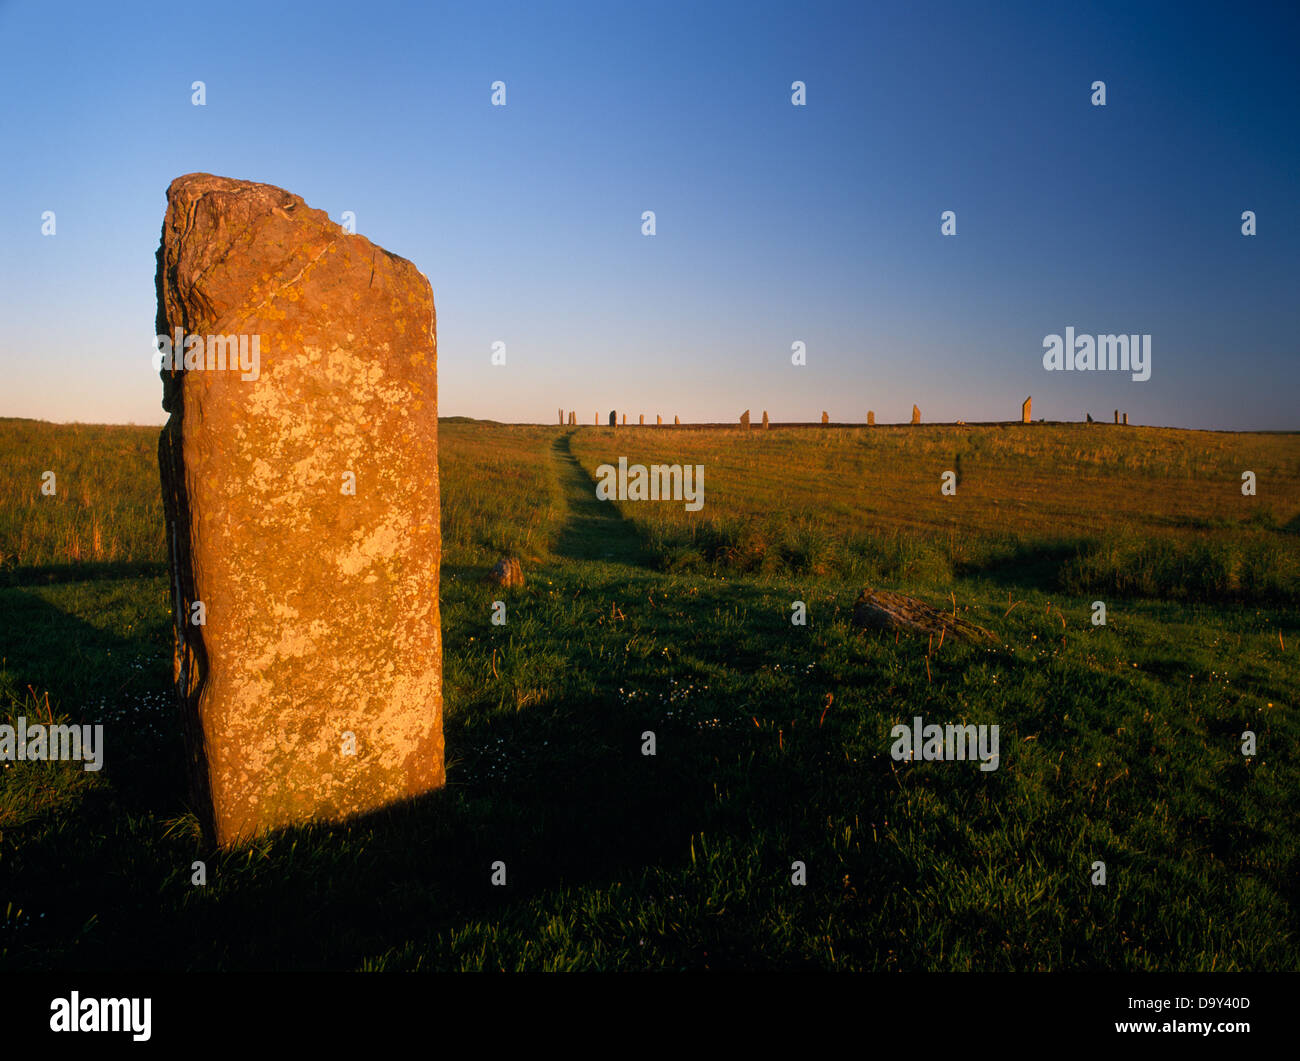 The Comet Stone, with the Ring of Brodgar henge and stone circle in the background, Orkney Mainland, Scotland; evening light Stock Photo